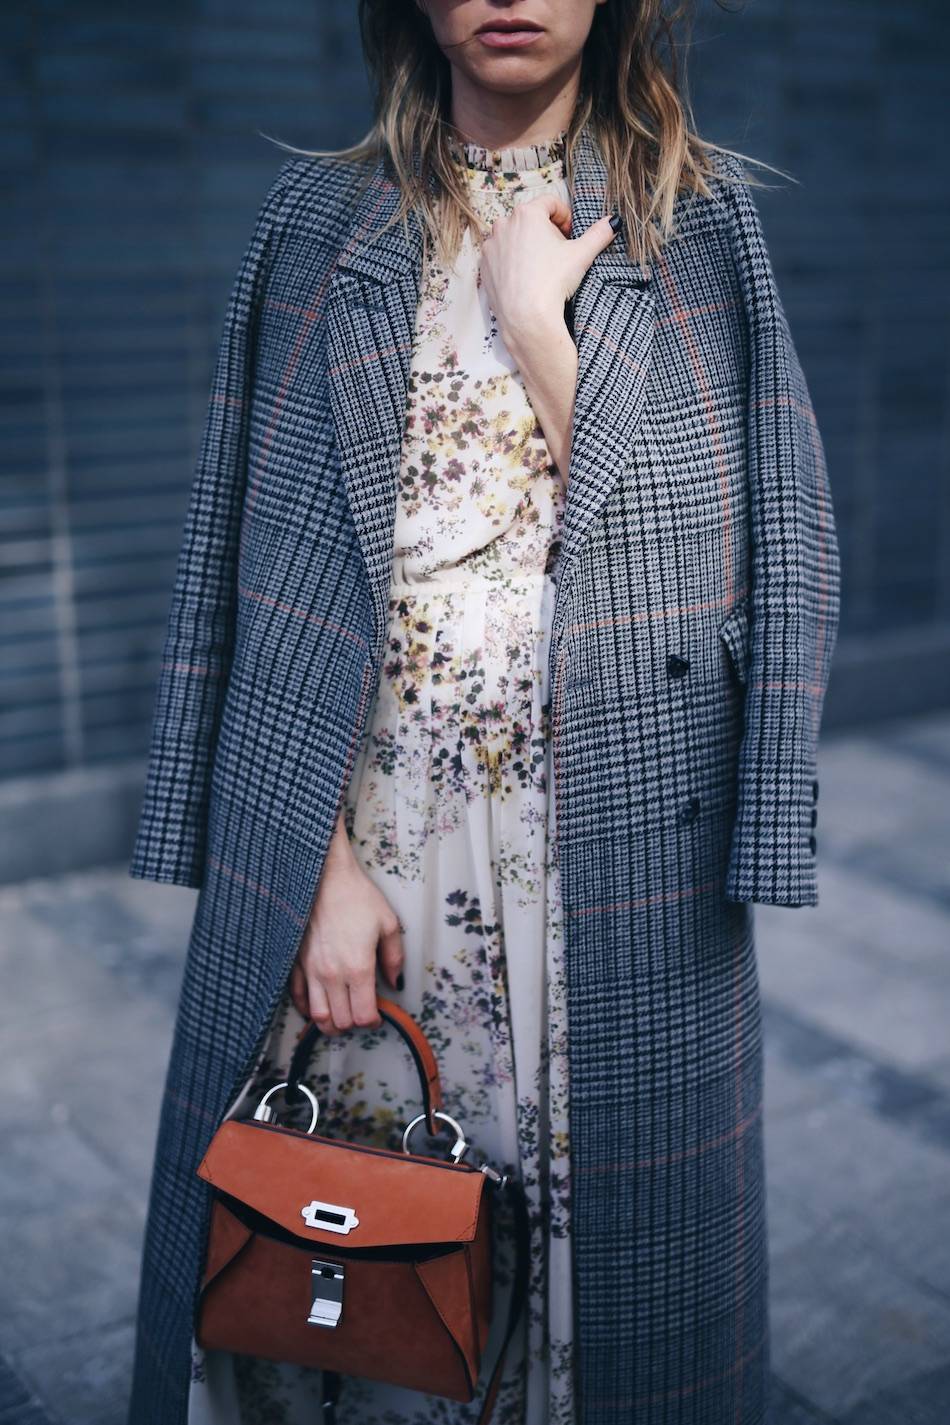 Style and beauty blogger Jill Lansky of The August Diaries on how to layer stylishly in plaid maxi coat, floral dress, Proenza Schouler hava bag